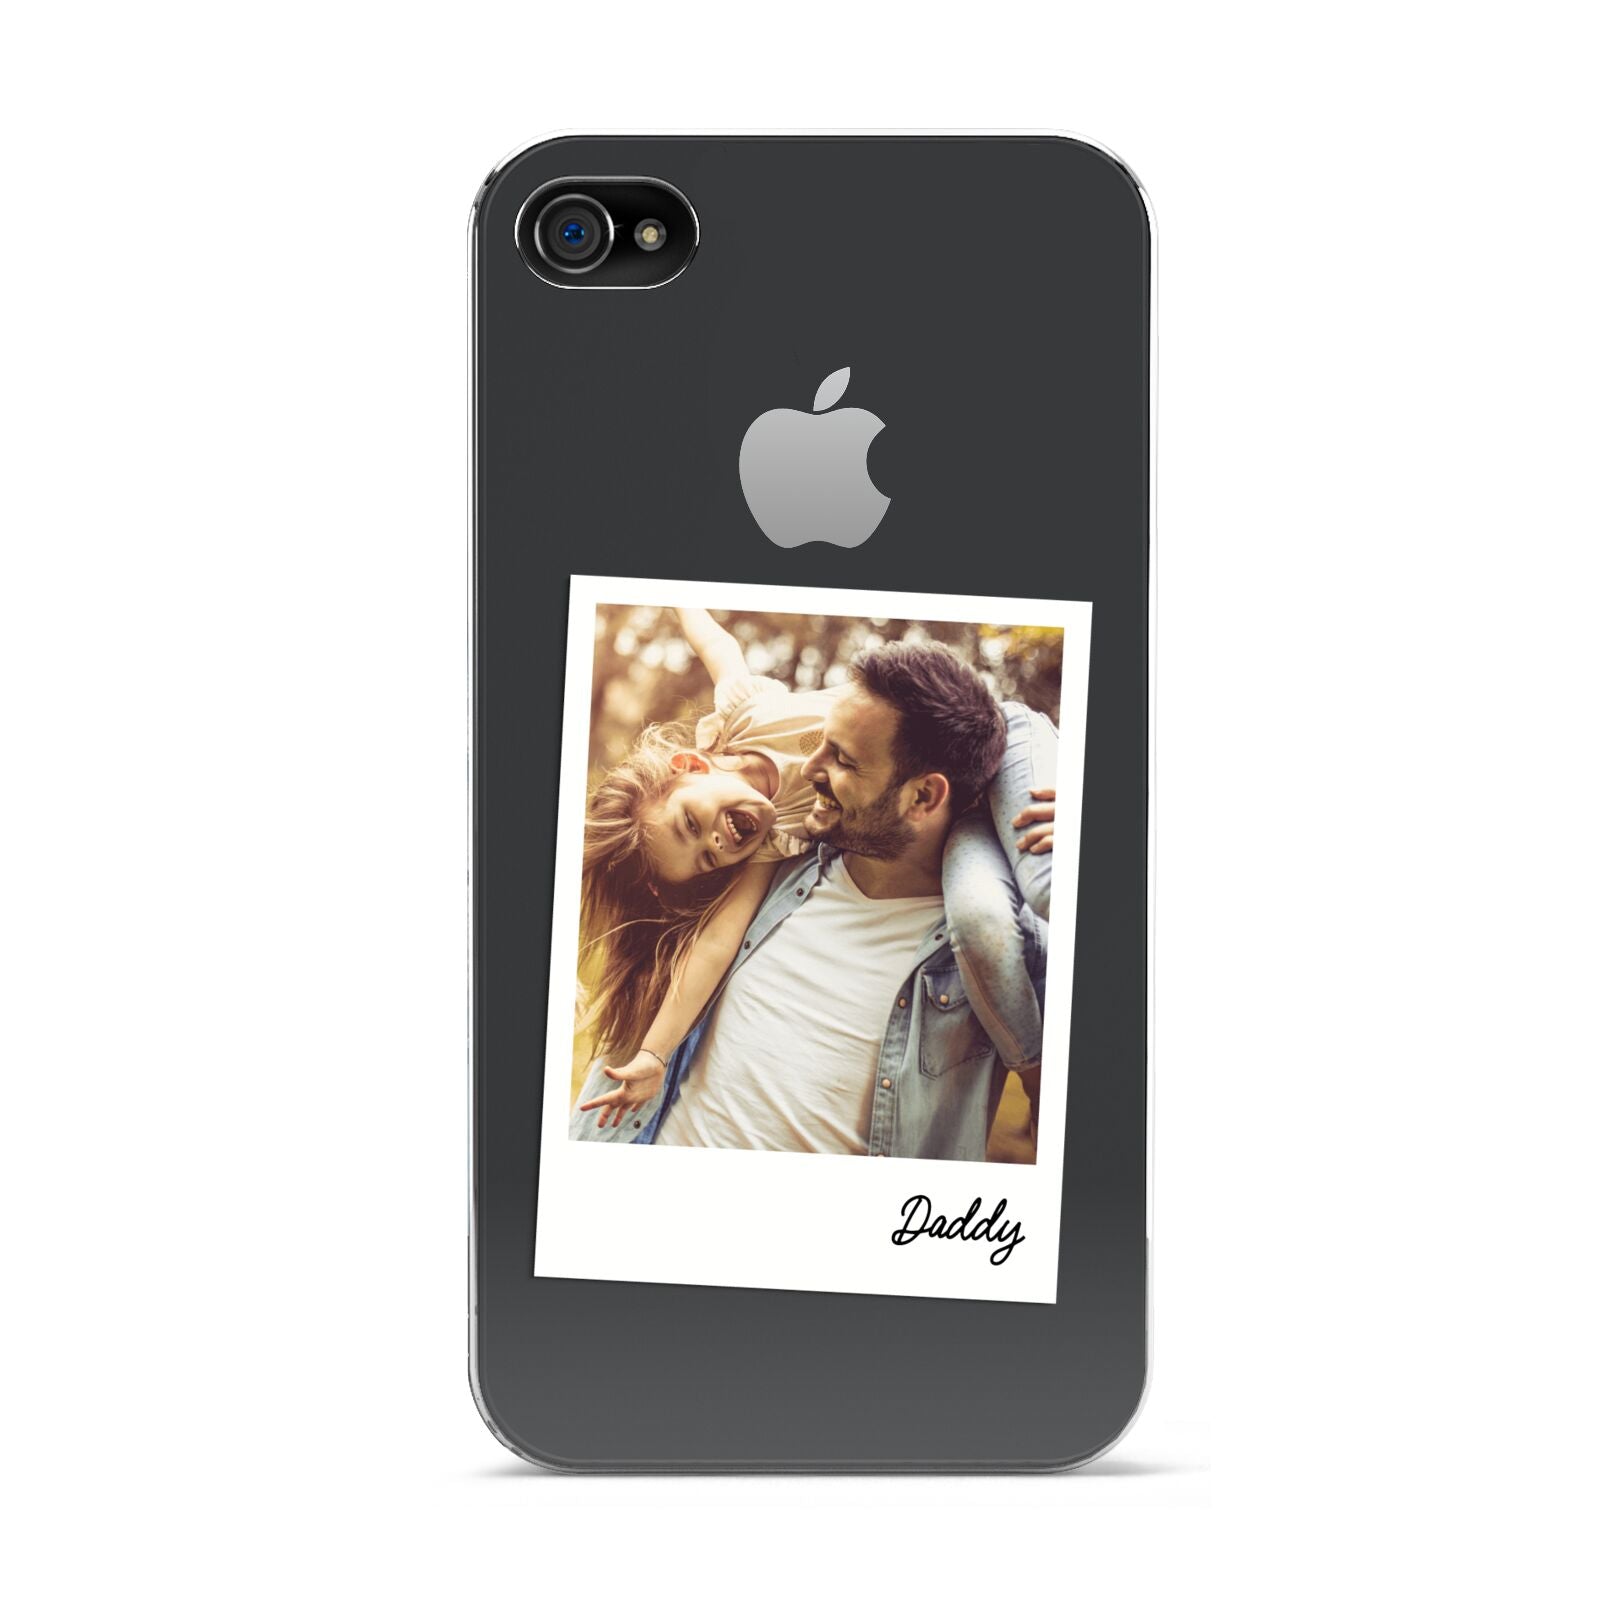 Fathers Day Photo Apple iPhone 4s Case